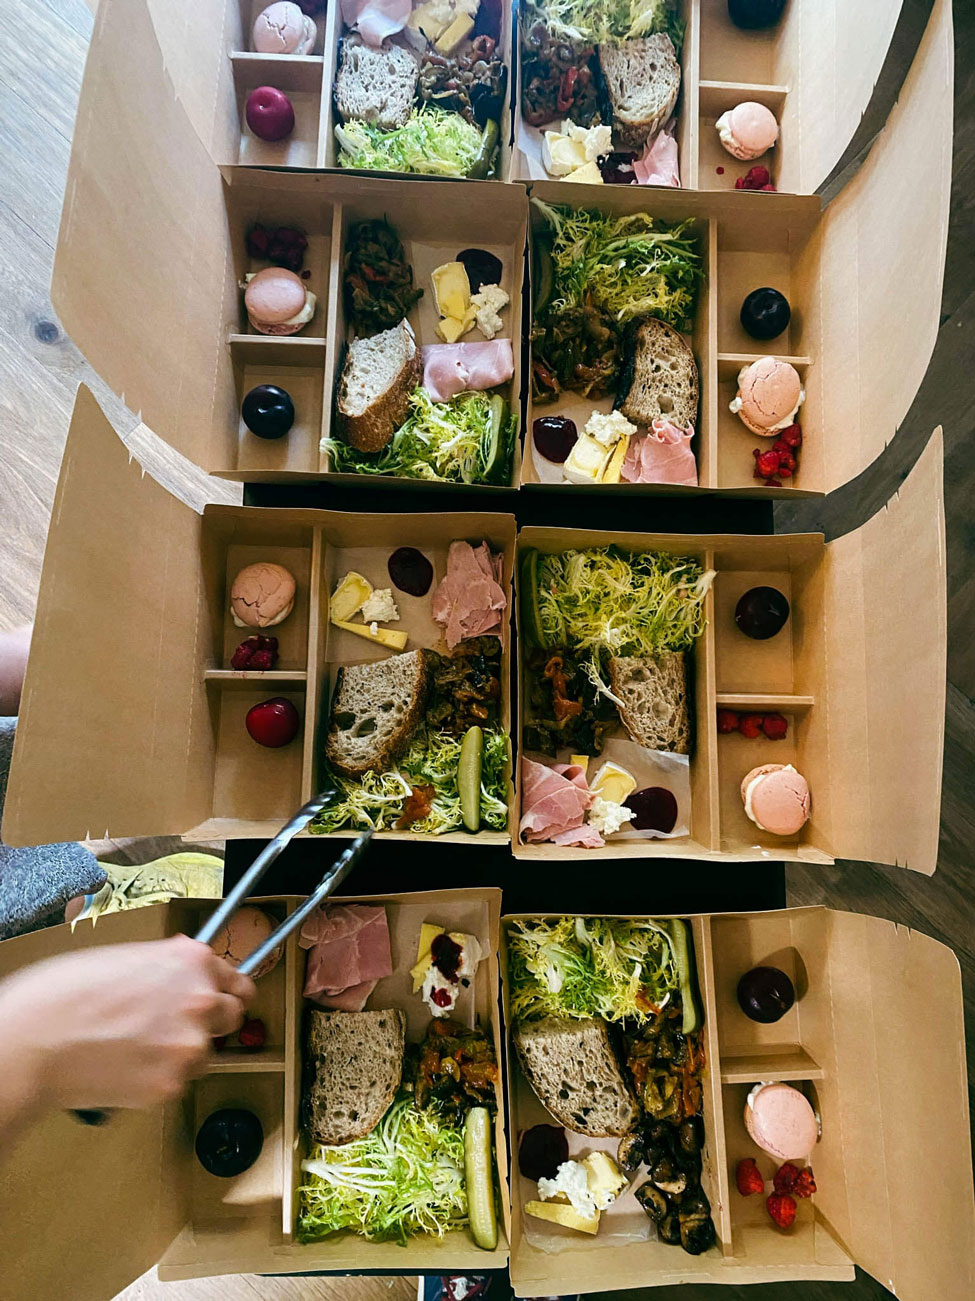 A person putting together picnic boxes.